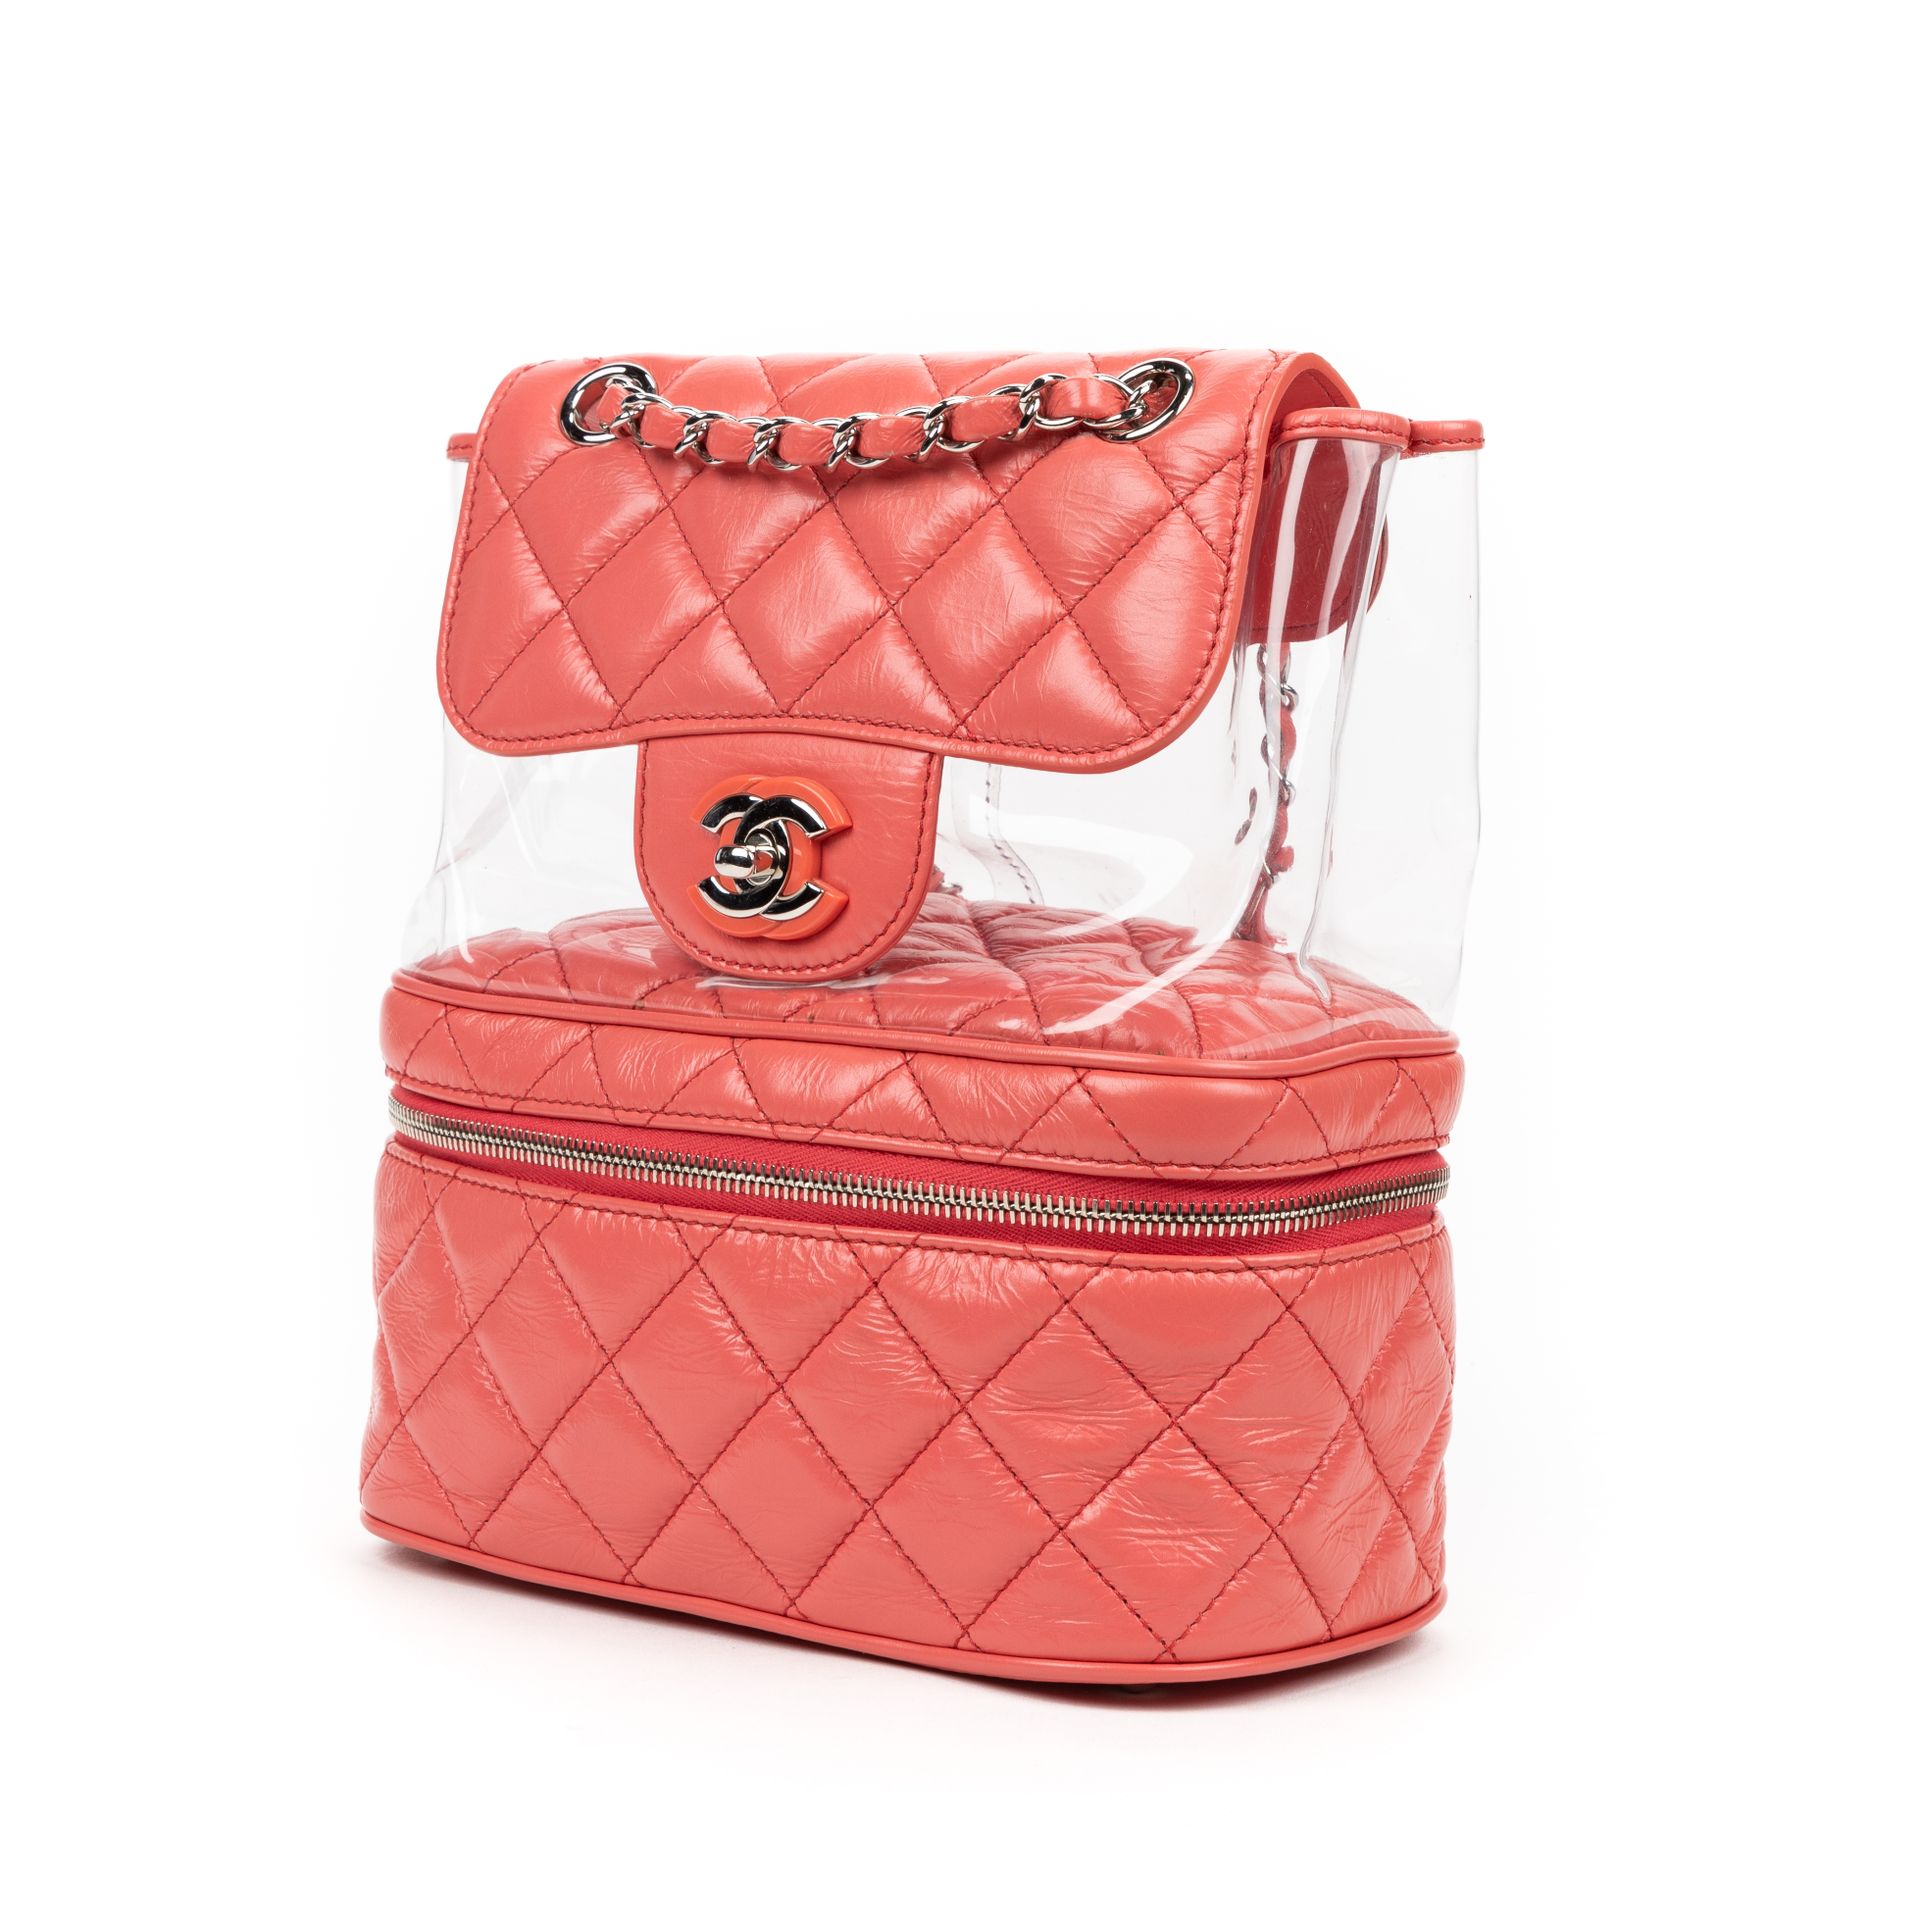 Chanel CHANEL Paris Small backpack in pink quilted leather and transparent plast&hellip;